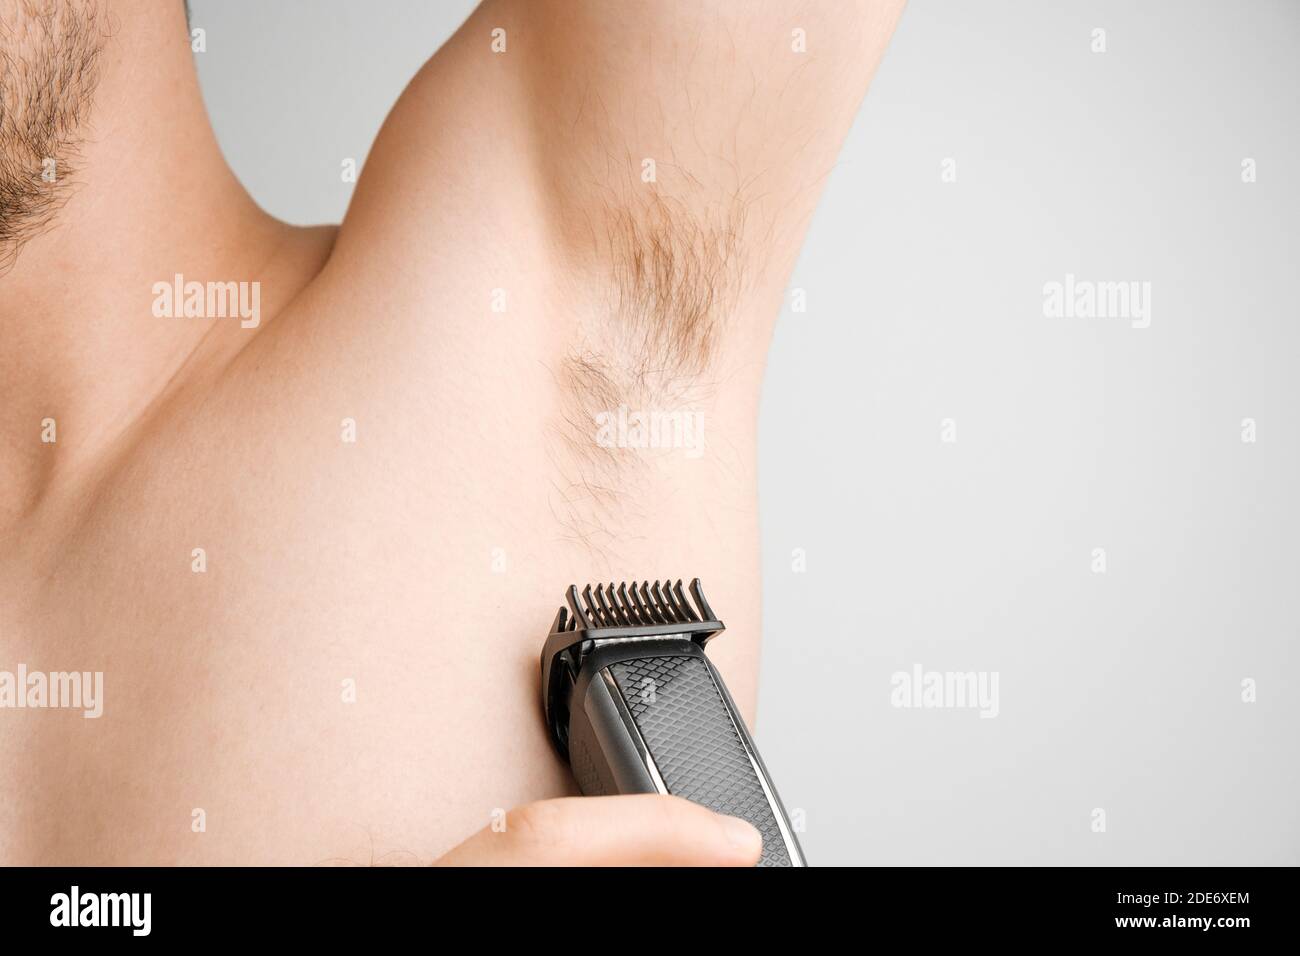 Close up man shaves hairy armpits with an electric razor. Unshaved armpits or underarm. Depilation and hair remove procedure using trimmer. Body Stock Photo